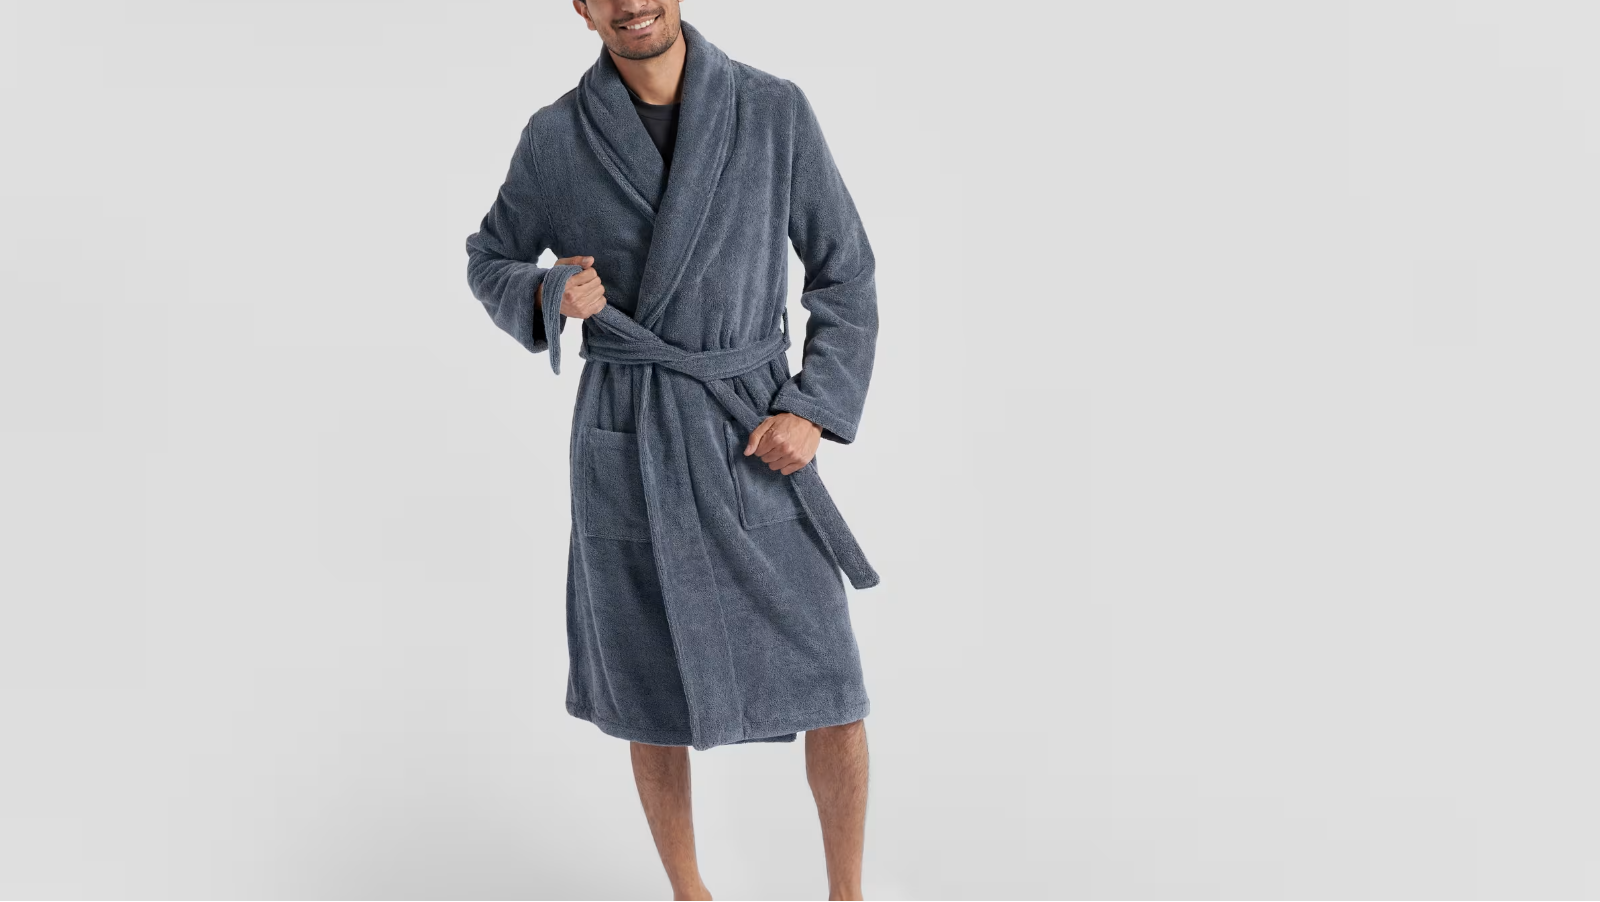 The best robes of 2023: Top reviewed bathrobes for men and women